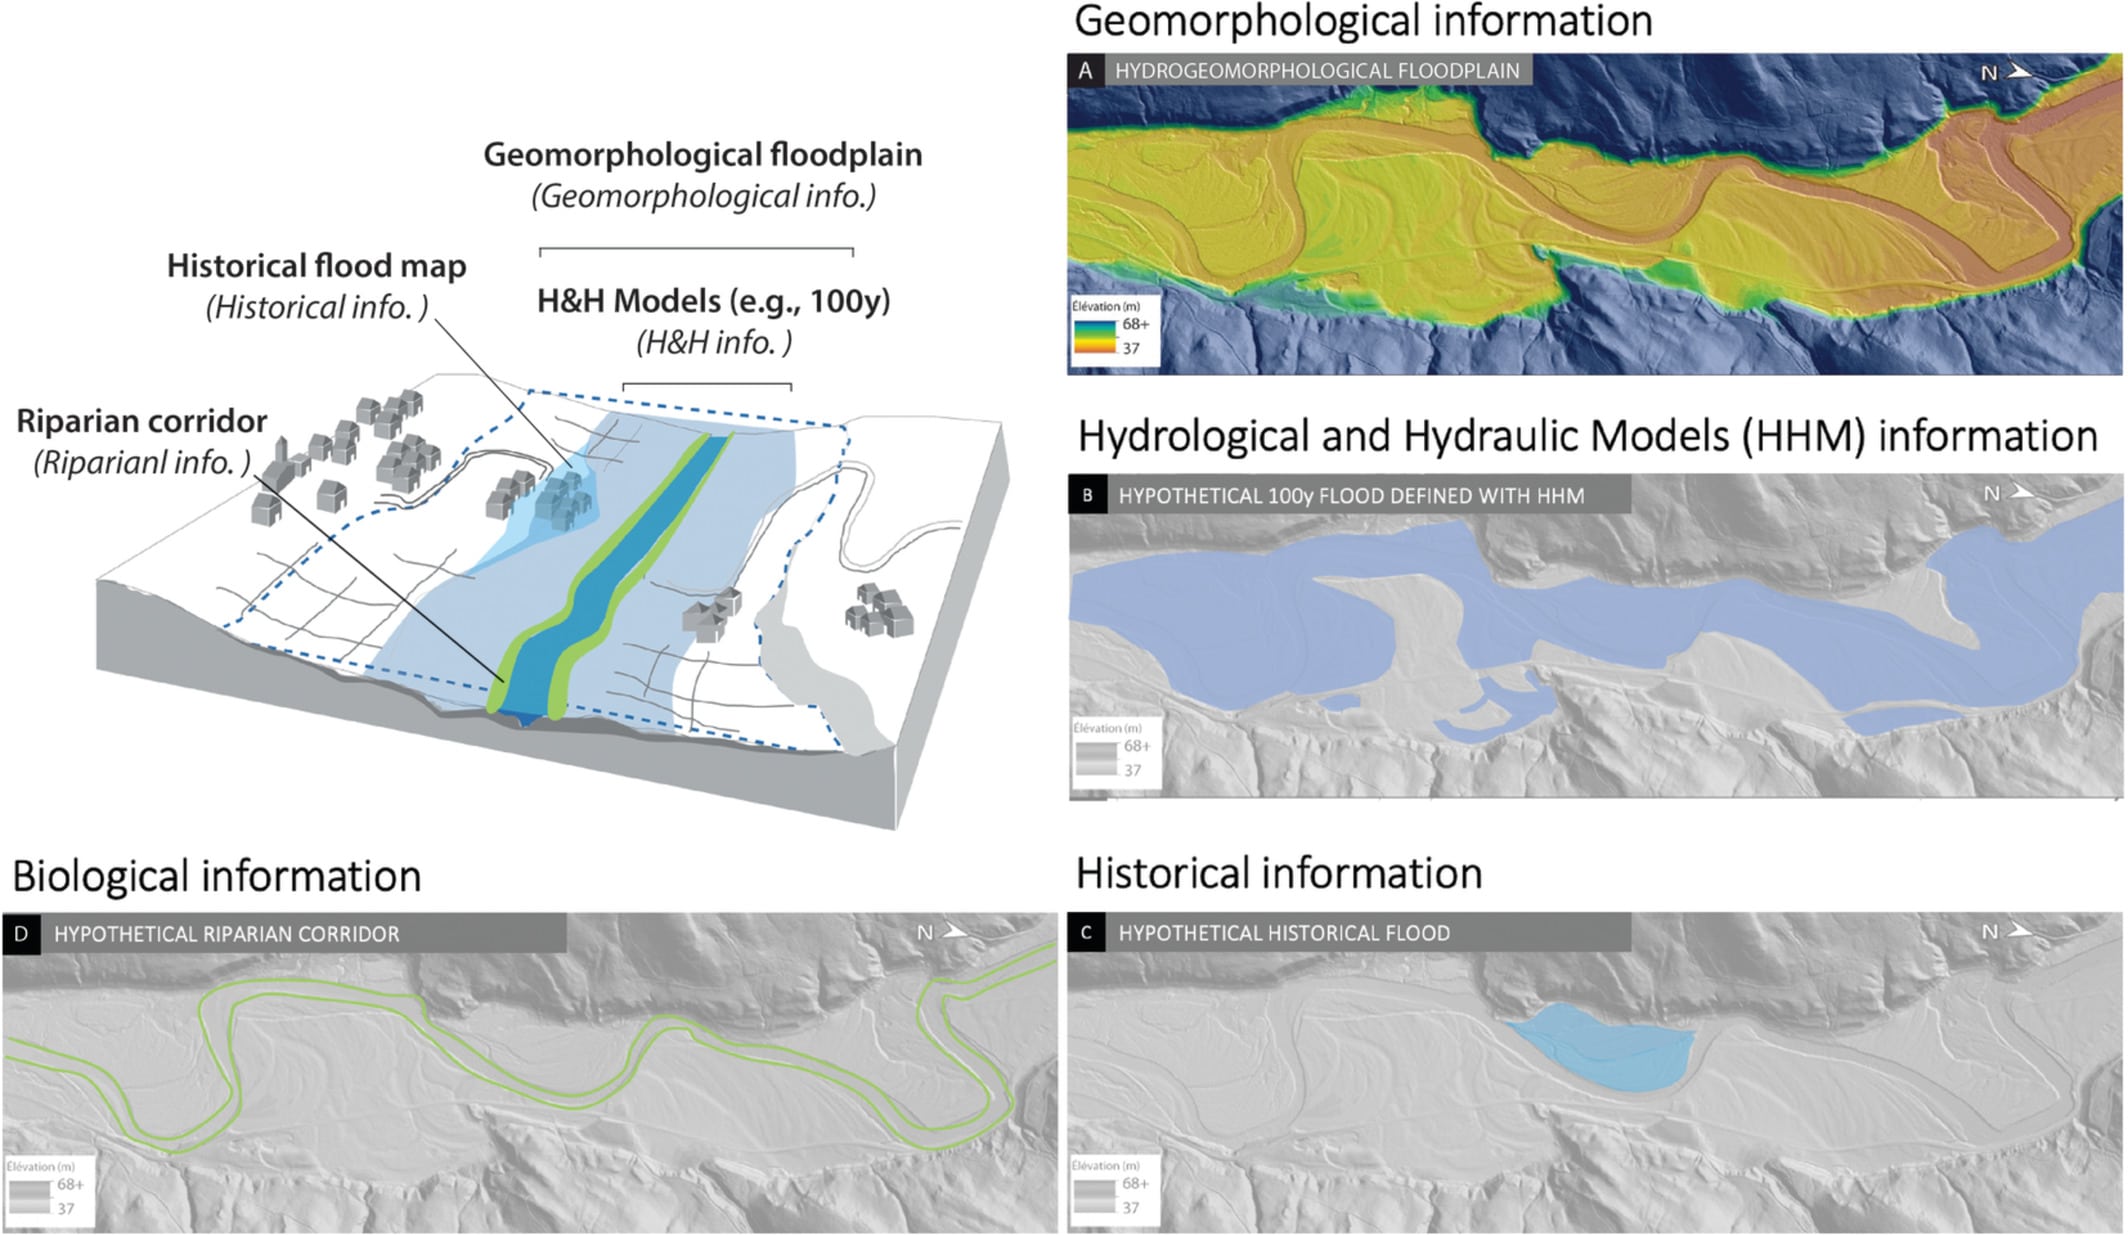 Different methods and types of information used to identify the main flood prone areas depicted in regulatory flood maps in (a) the USA, (b) France, and (c) Quebec